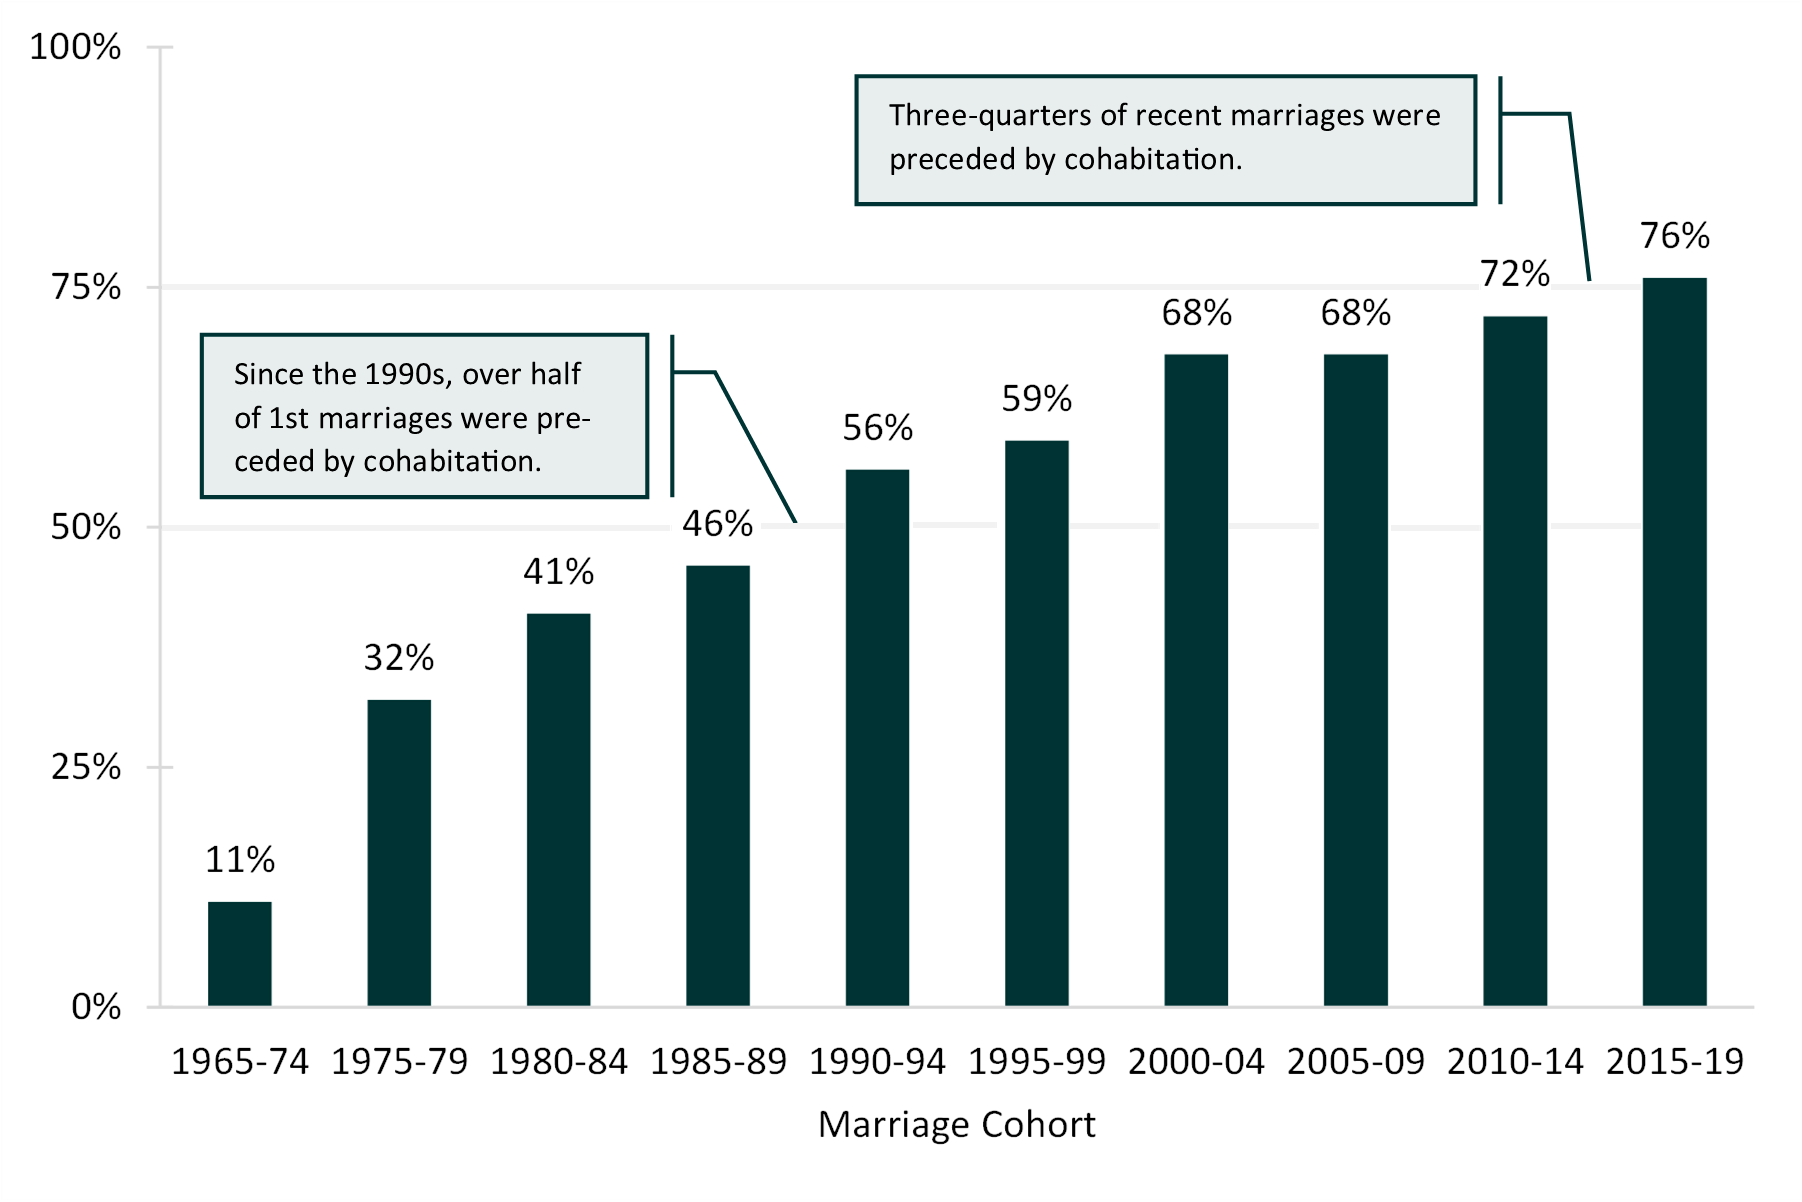 bar chart showing Figure 1. Fifty Years of Change in the Share of Women (19-44) Cohabiting Prior to 1st Marriage, by Marriage Cohort